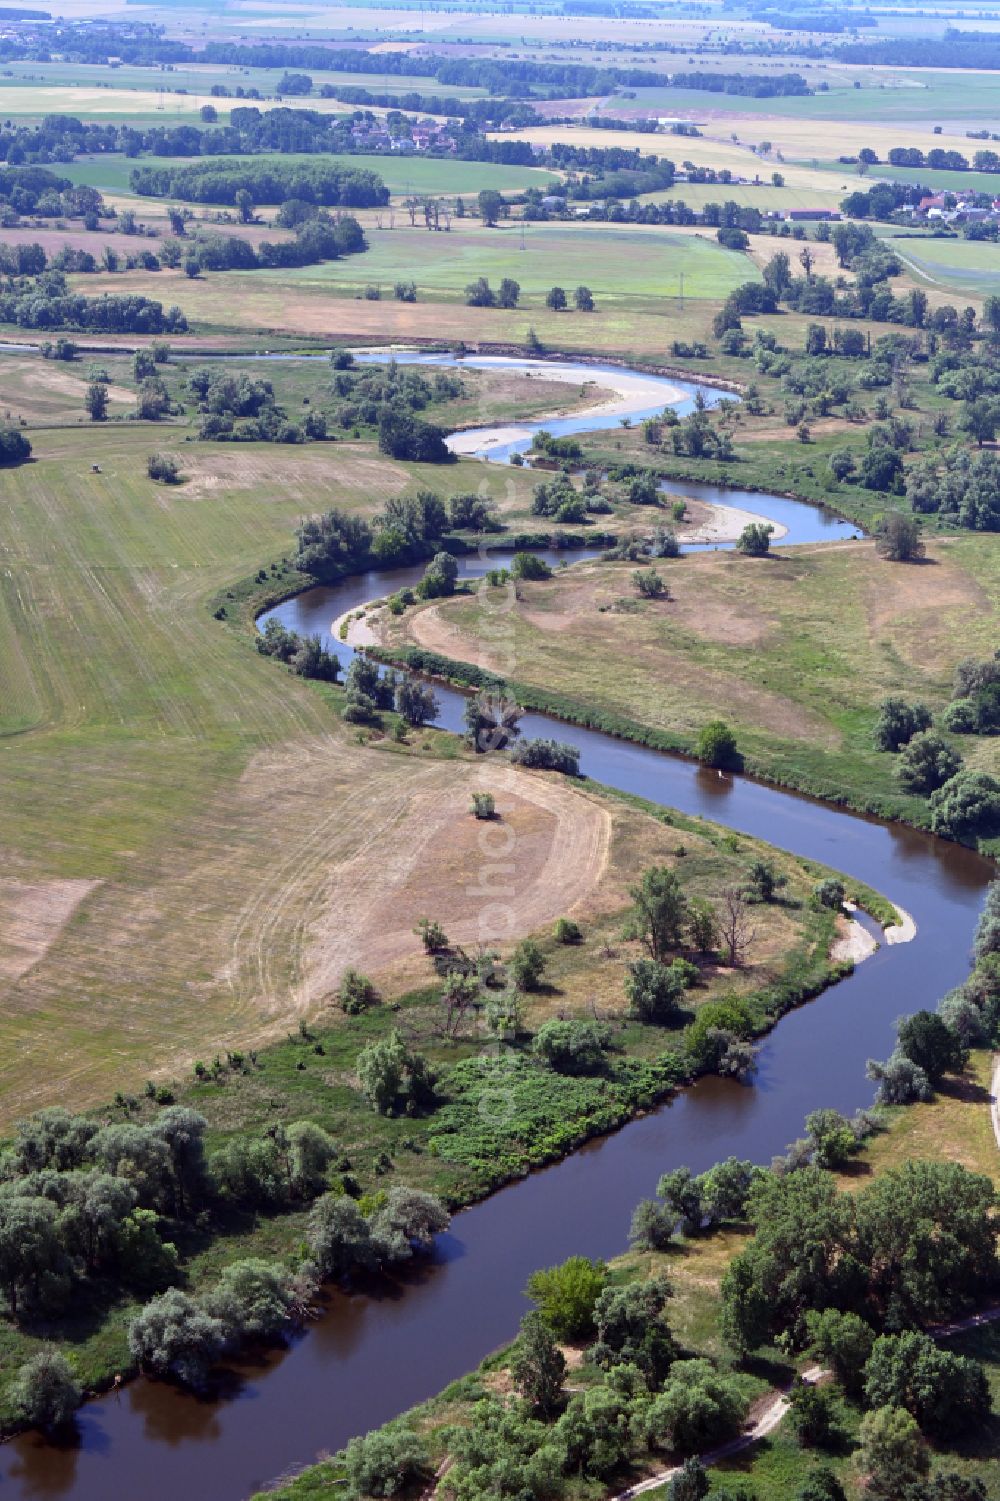 Aerial image Laußig - Meandering, serpentine curve of river of Mulde in Laussig in the state Saxony, Germany